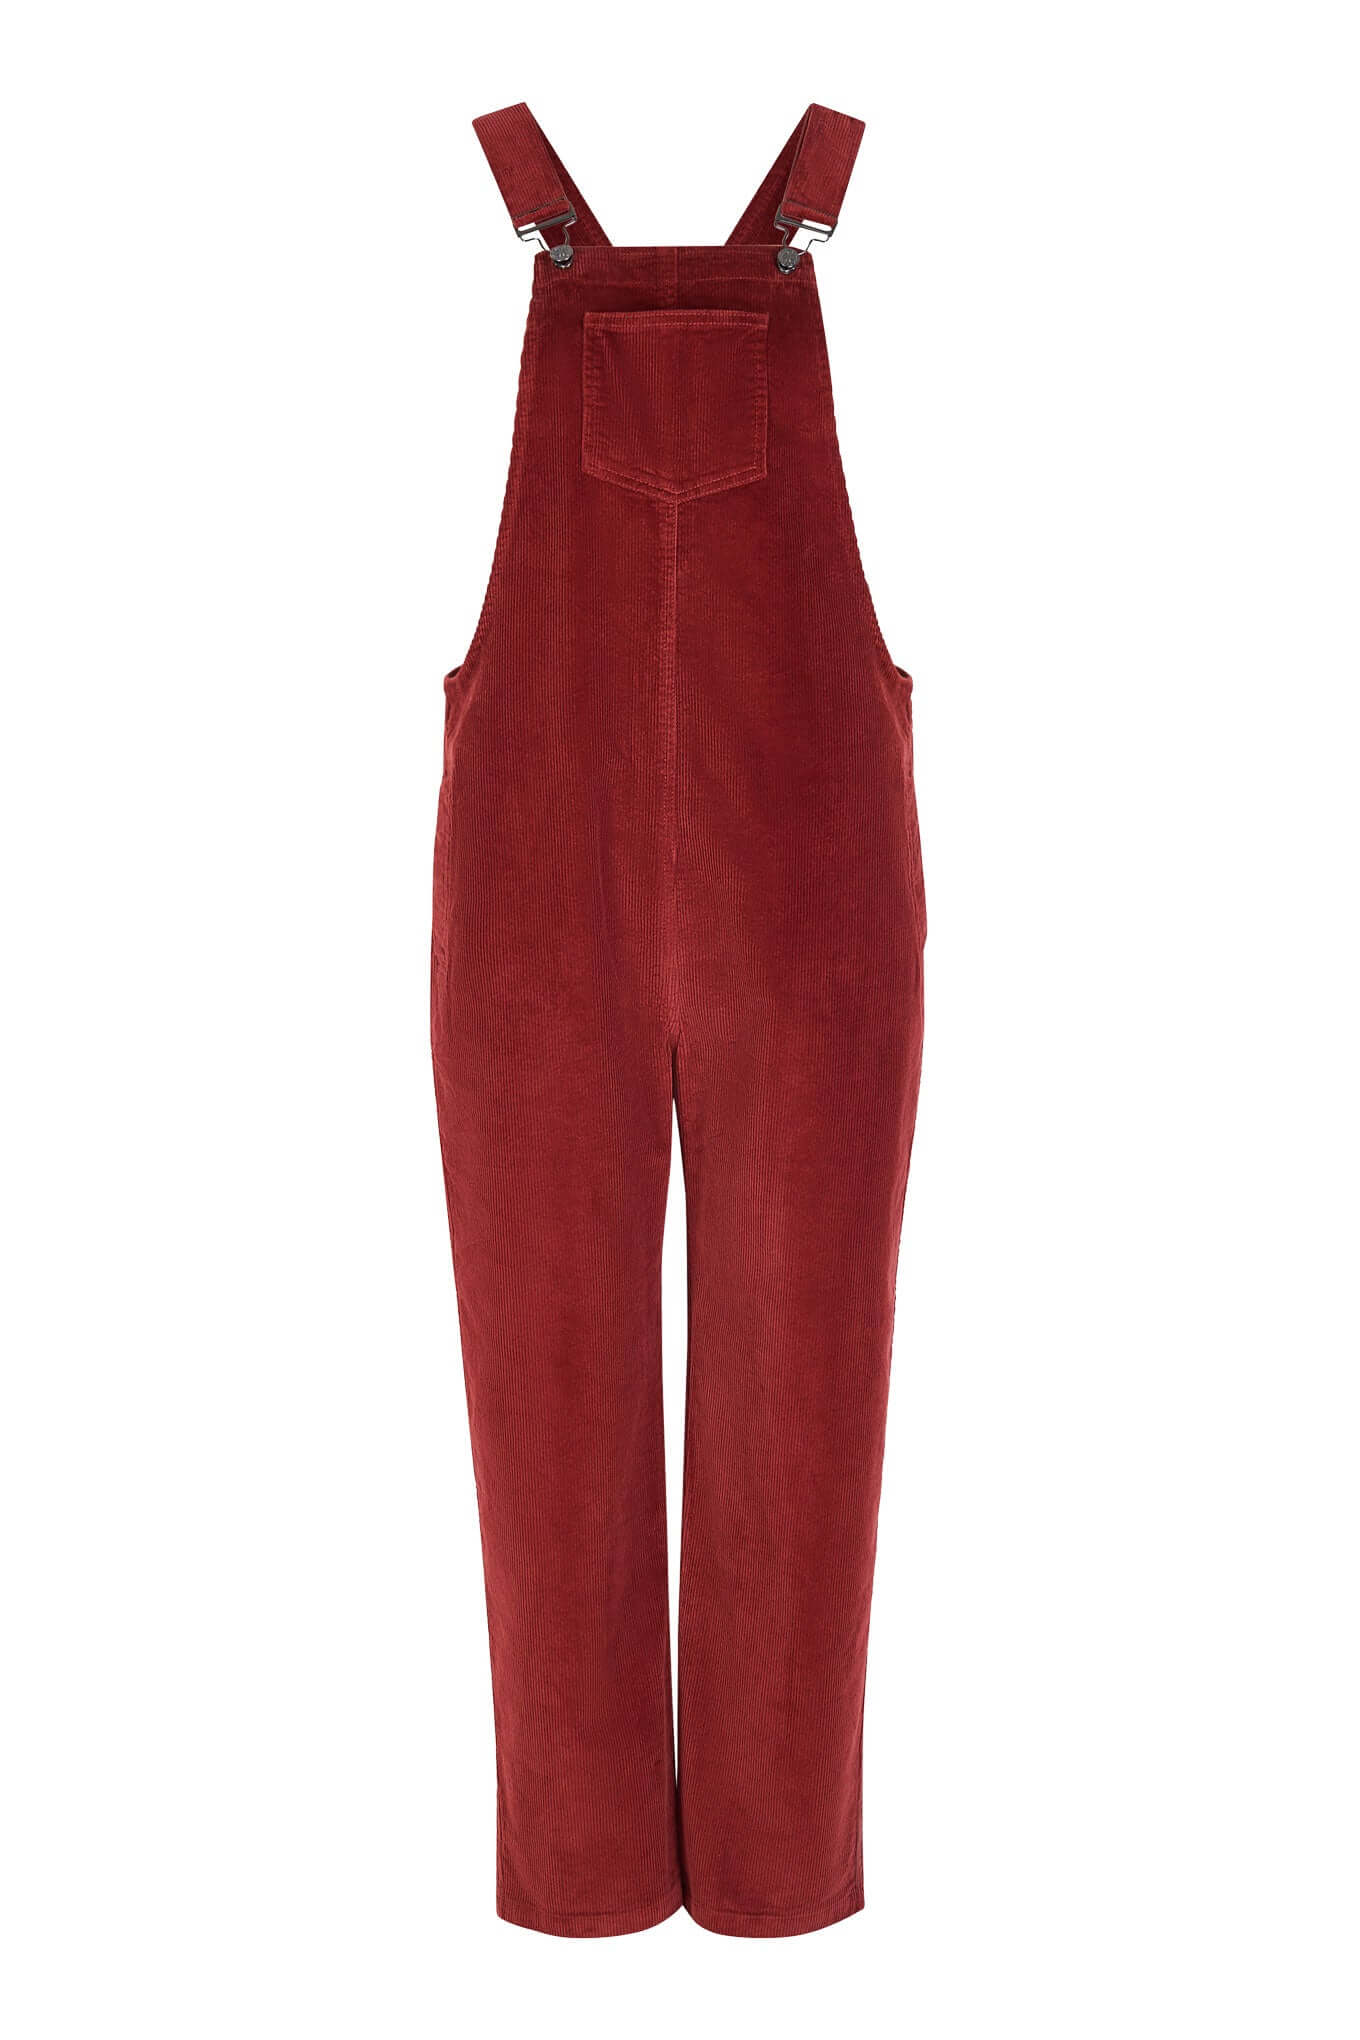 Red JOY dungarees made of organic cotton from Komodo